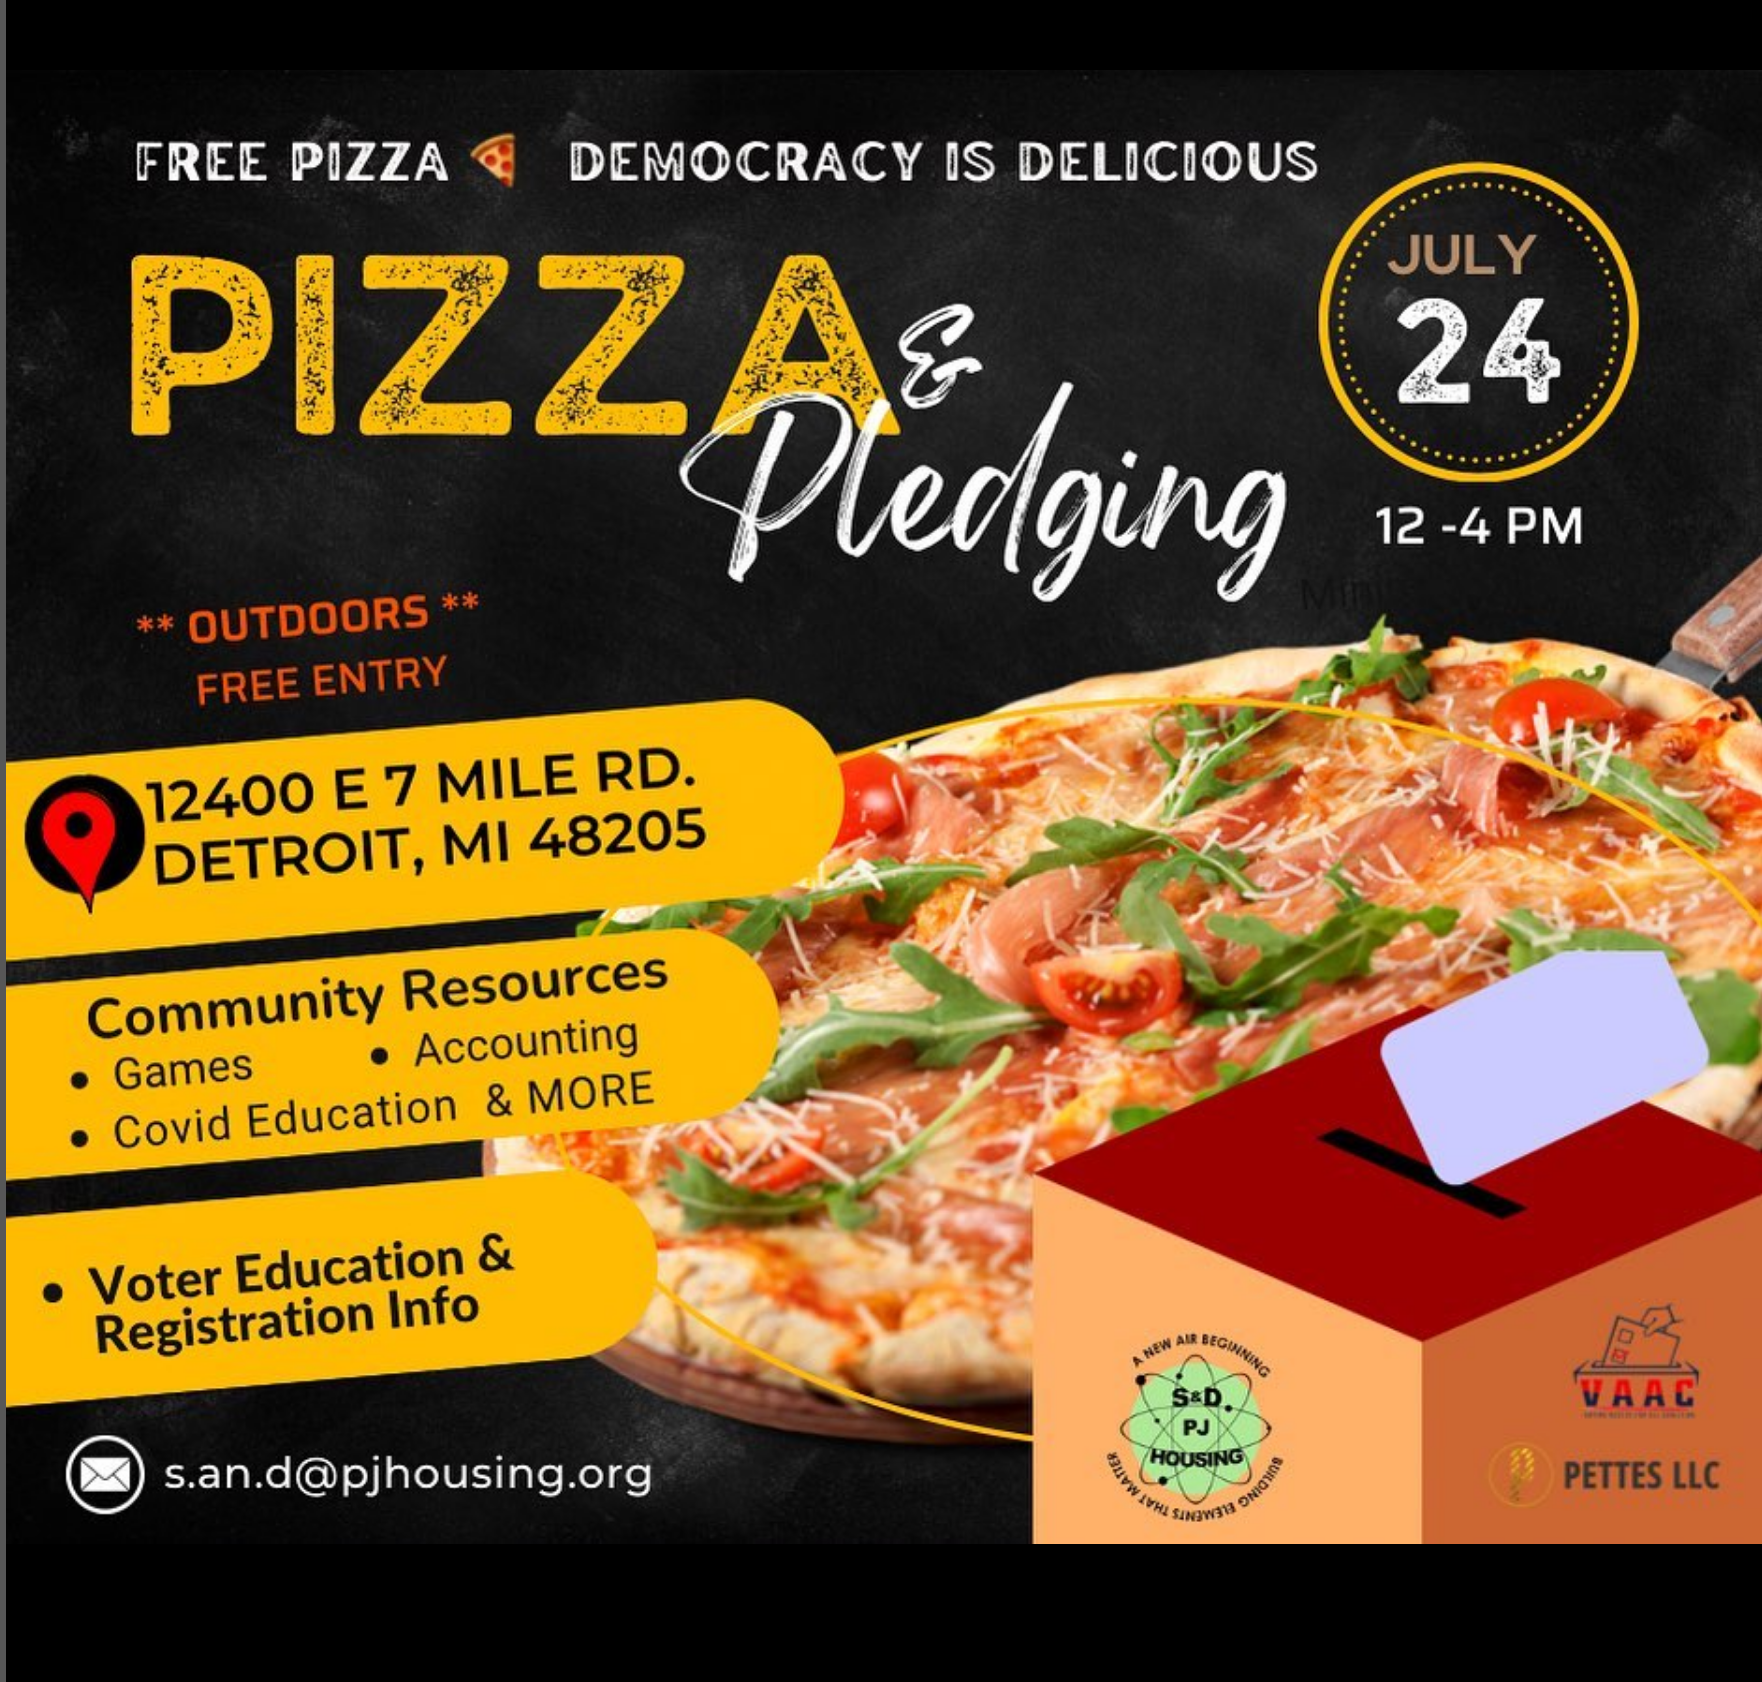 We All Vote for Pizza!